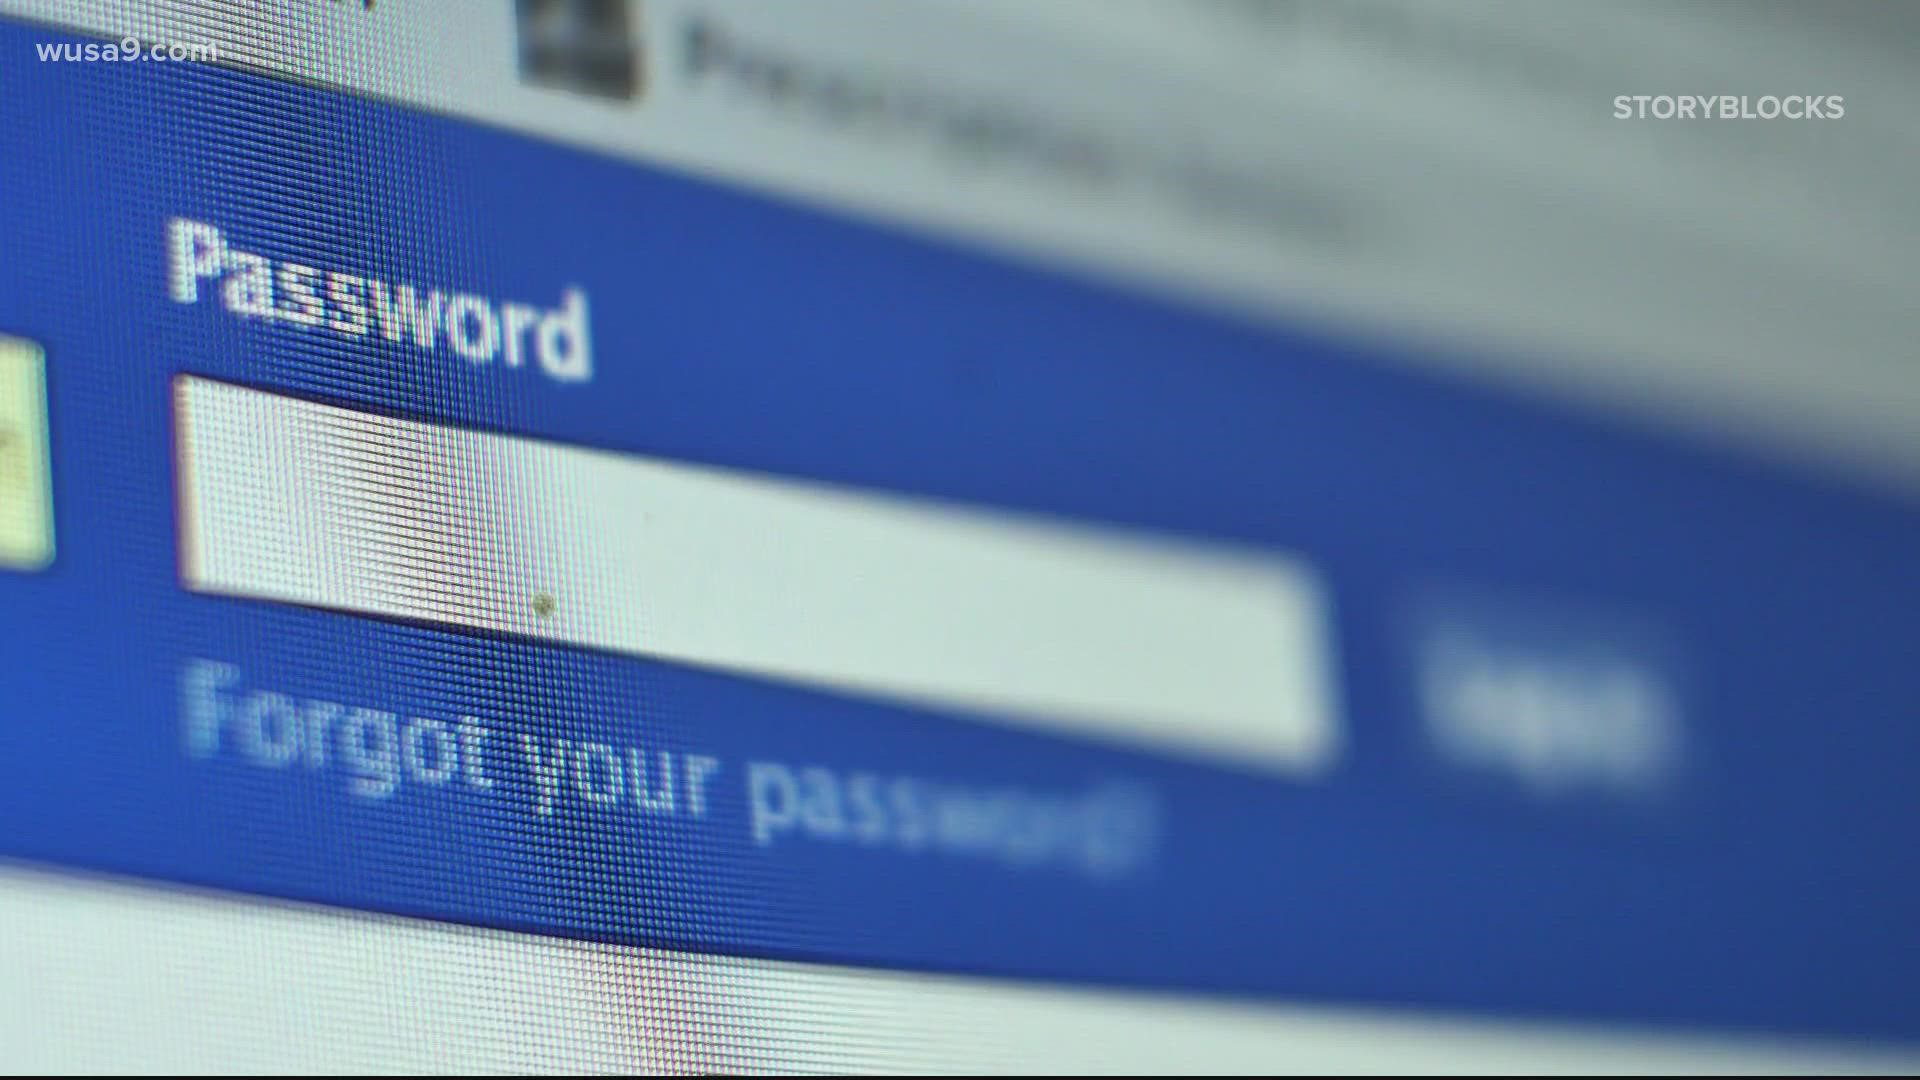 Facebook is asking some users to register for "Facebook Protect" within 15 days. They say it's an extra layer of cybersecurity to prevent account hacks.